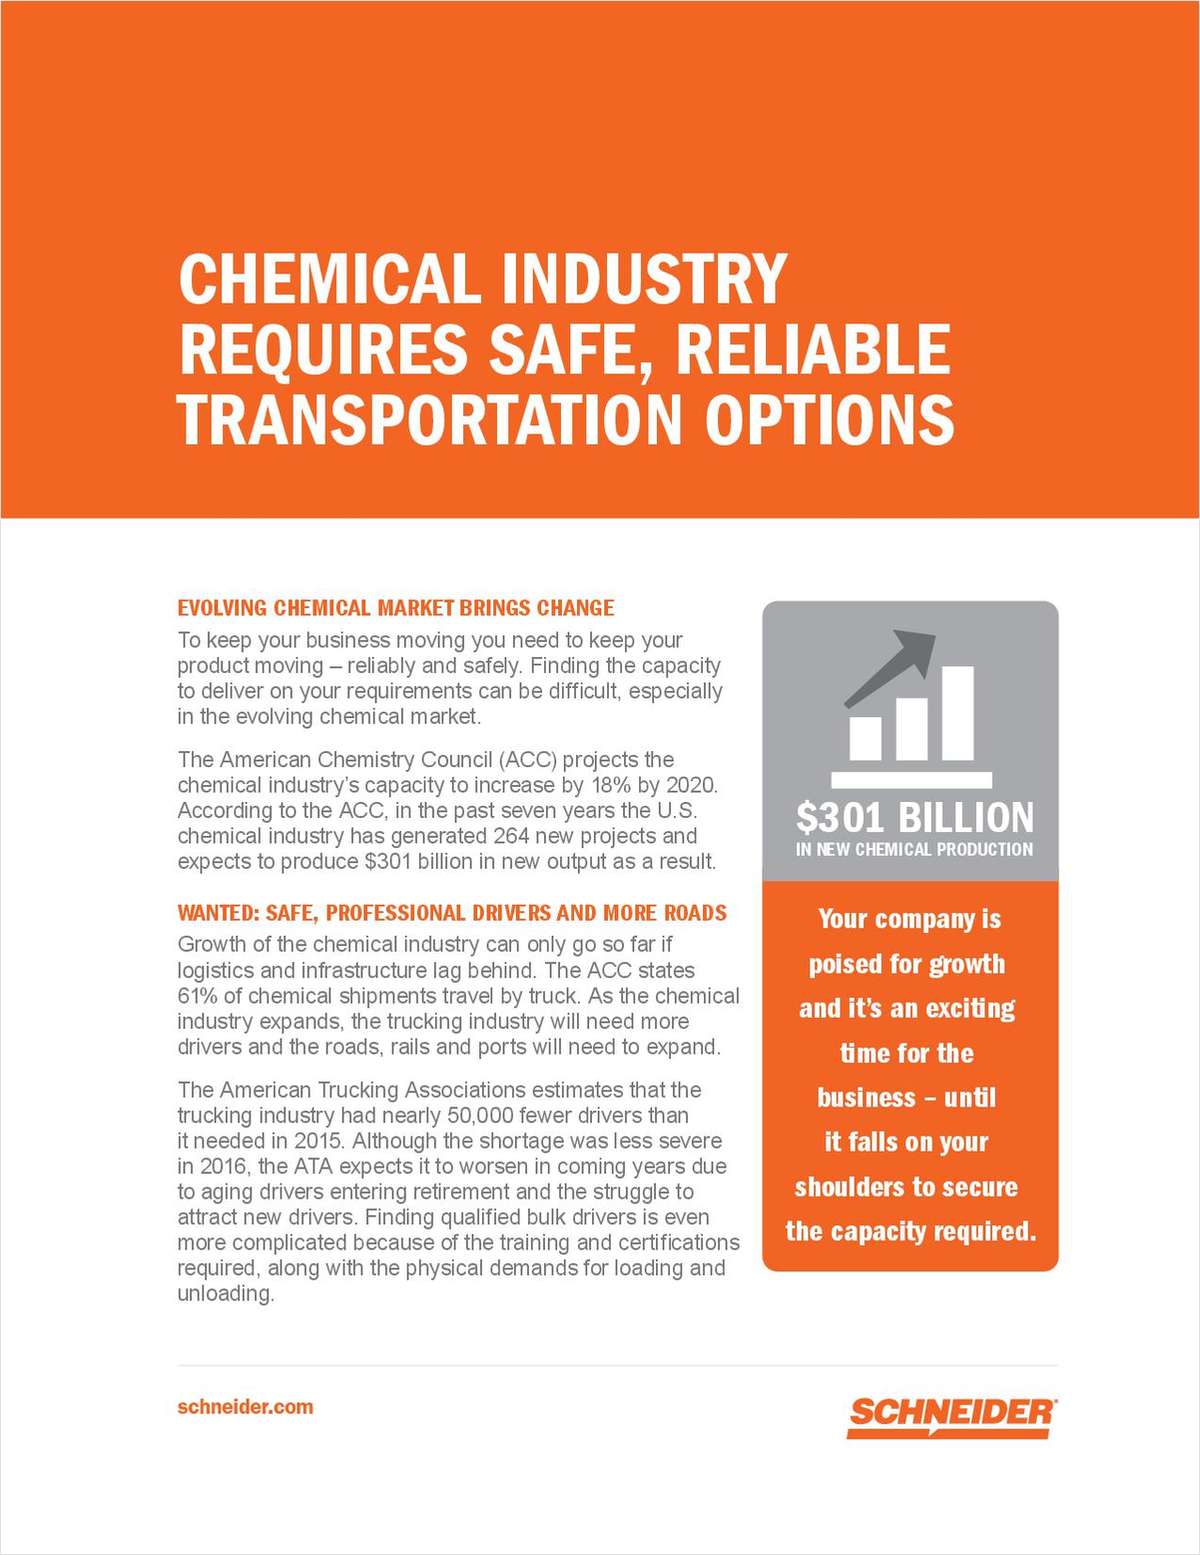 How Today's Leading Chemical Companies are Navigating Industry Changes with Consistent, Professional Safe Transportation